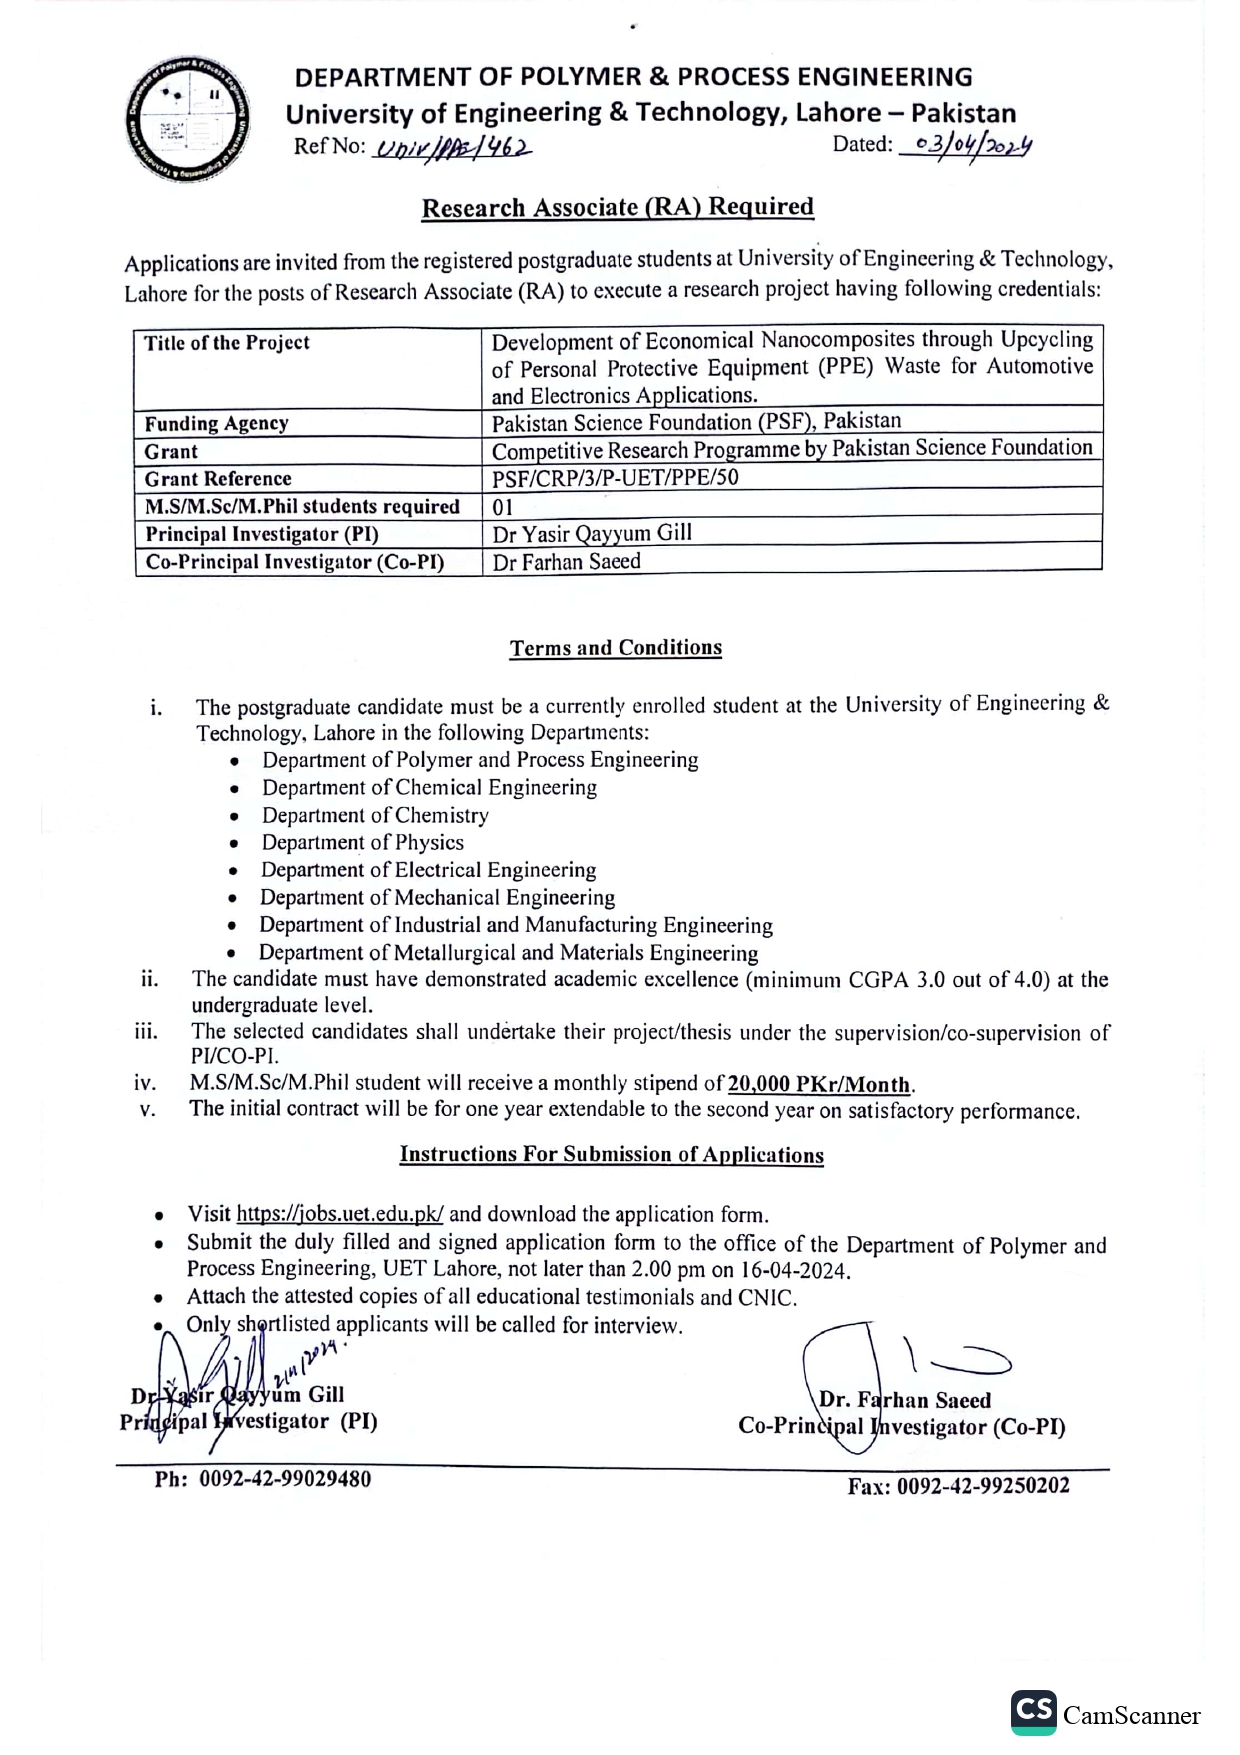 Advertisement for RA Hiring_page-0001